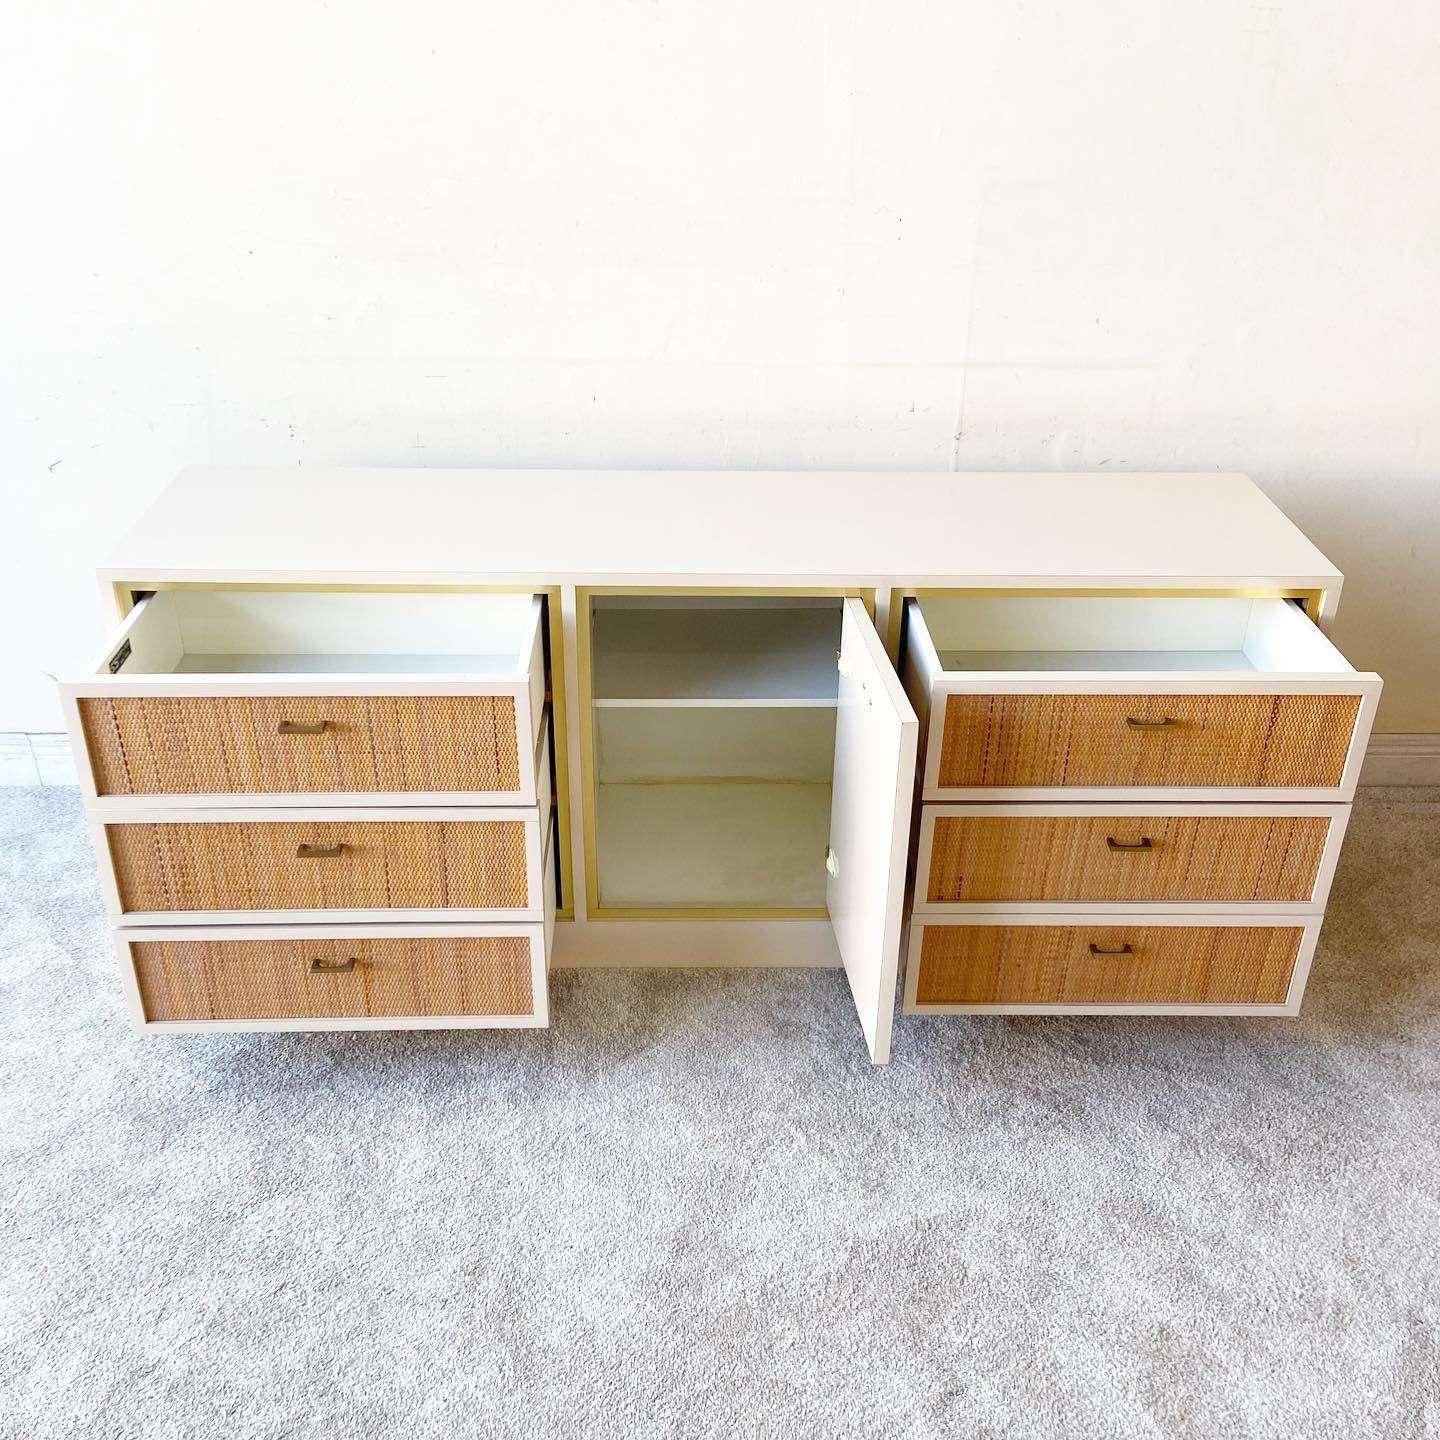 Postmodern Boho Cream Lacquer Laminate and Wicker Dresser - 6 Drawers For Sale 2